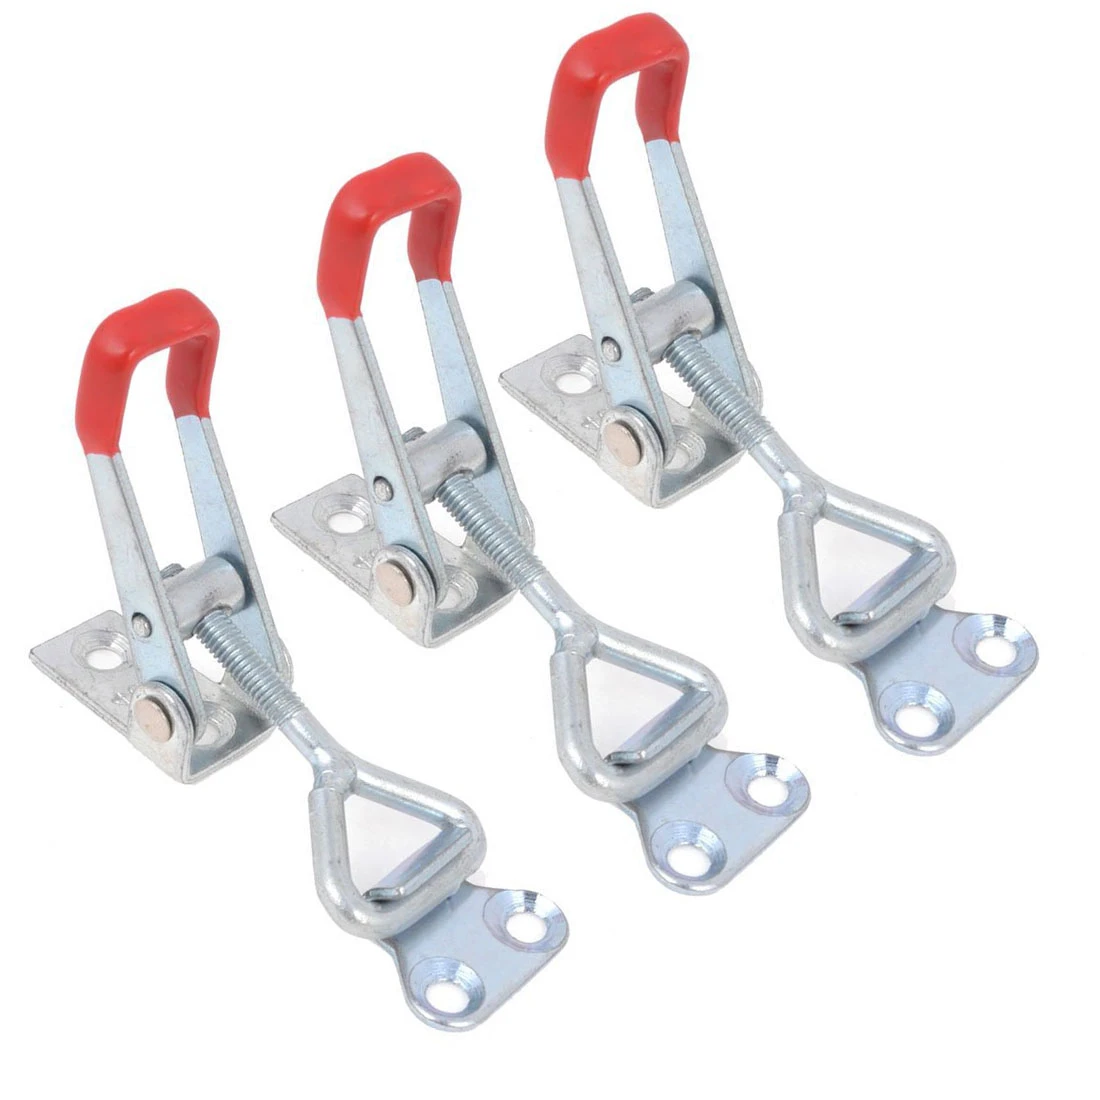 id:85e e1 fe ed7 New Lon0167 Plastic Cover Featured Lever Door Button reliable efficacy Type Metal U Nonslip Handle Triangle Shaped Lever Holding Capacity Latch 100Kg 220Lbs Toggle Clamp 4001 